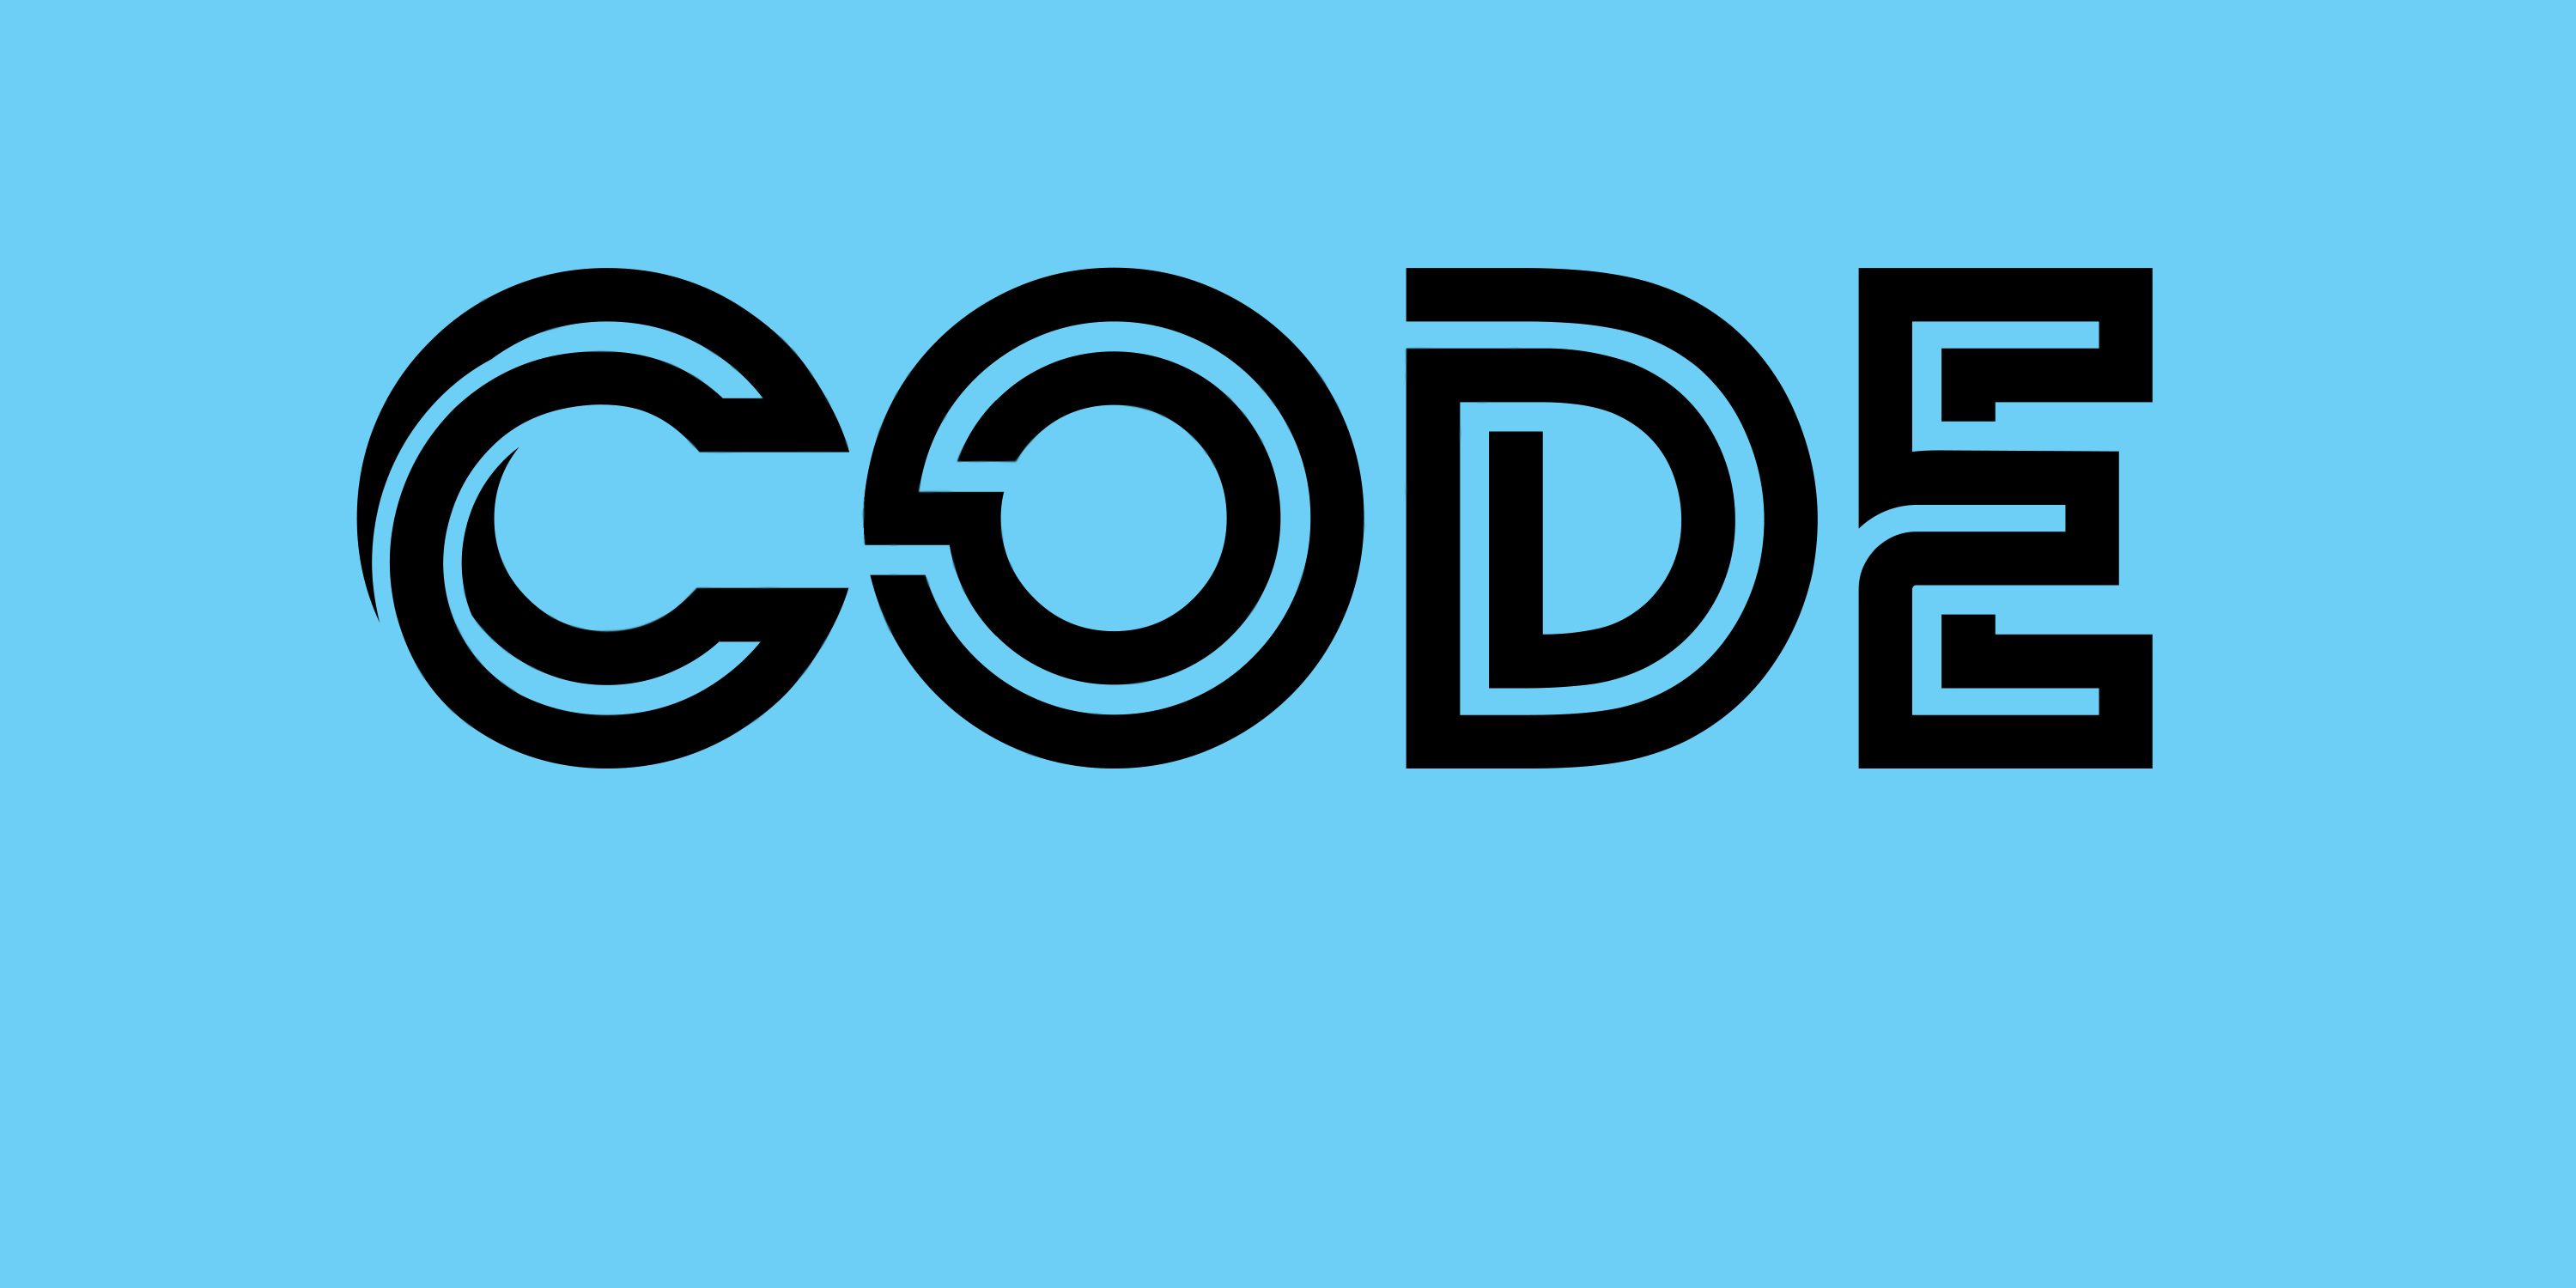 Code Code Clan Typography Simple Background 3000x1500